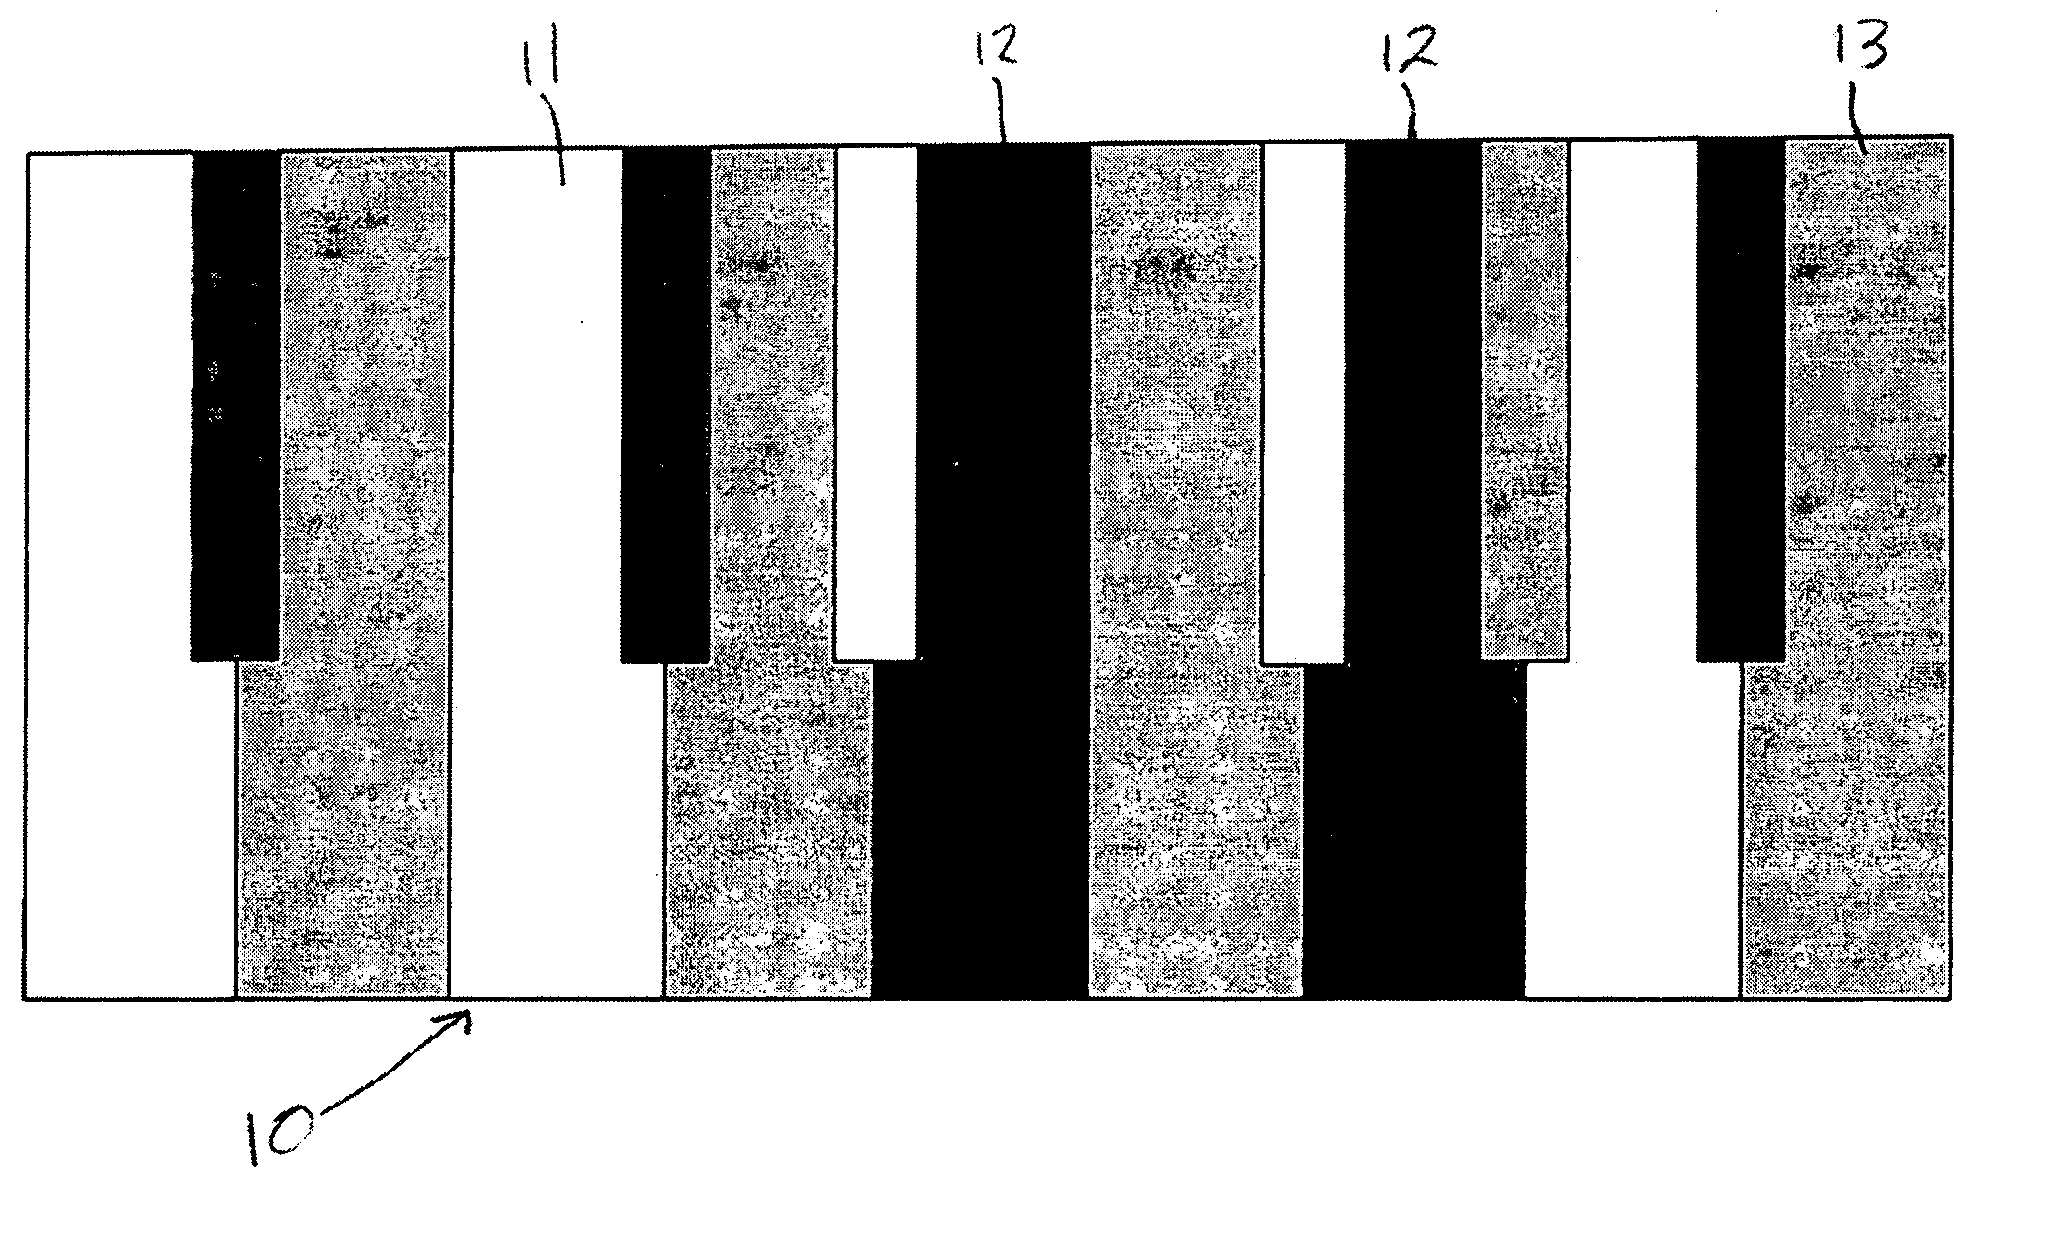 Method and apparatus for teaching music and for recognizing chords and intervals